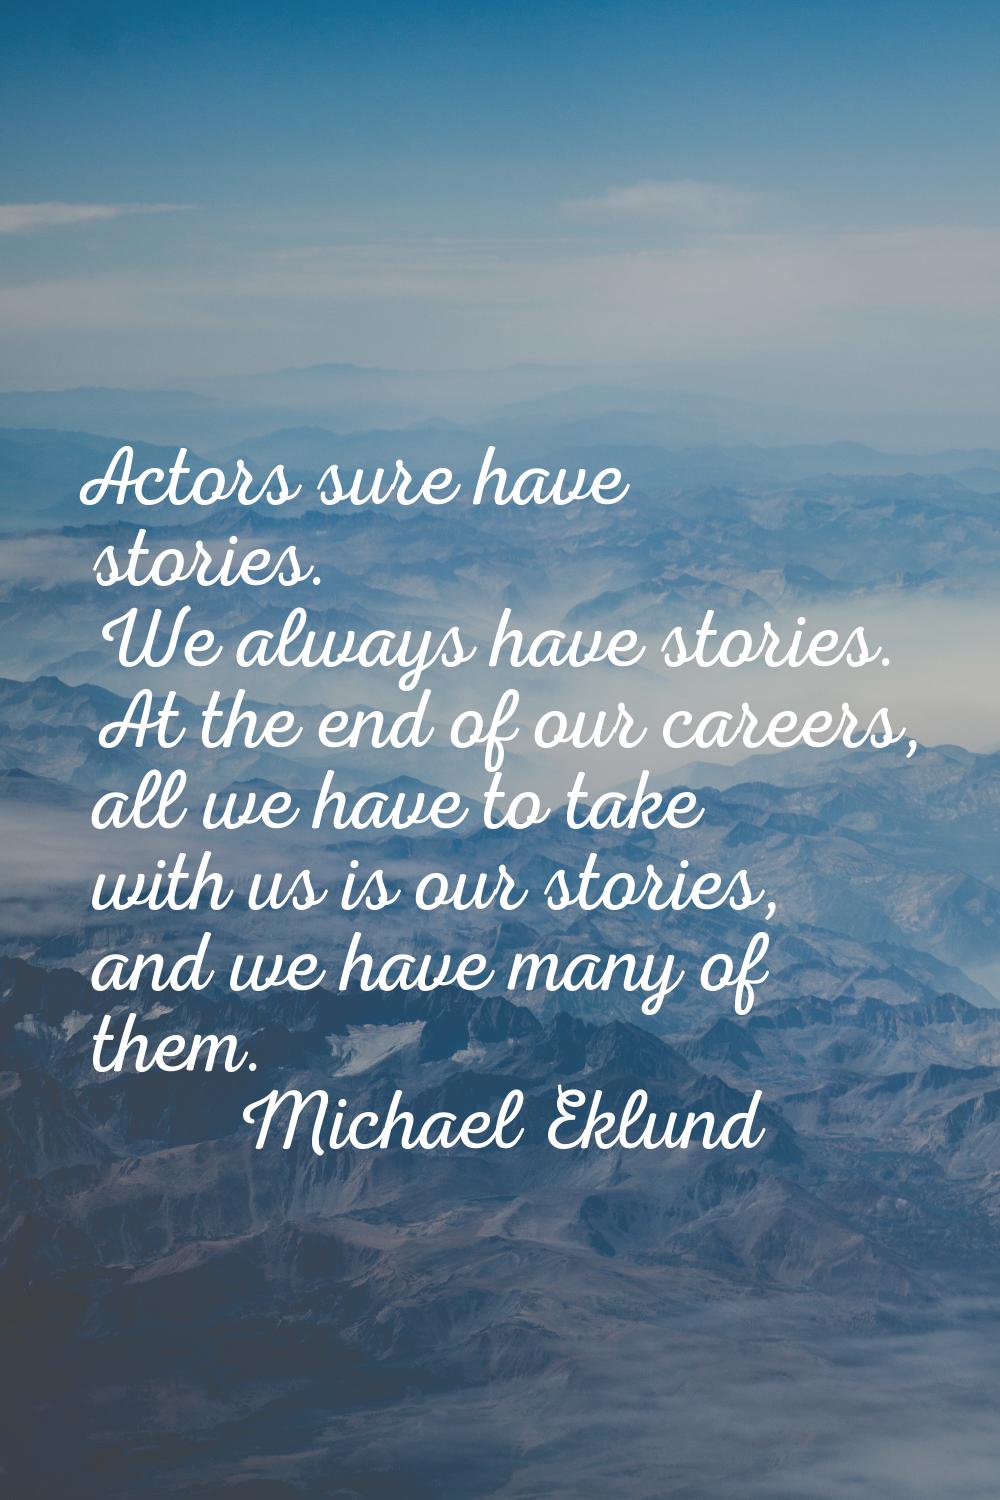 Actors sure have stories. We always have stories. At the end of our careers, all we have to take wi